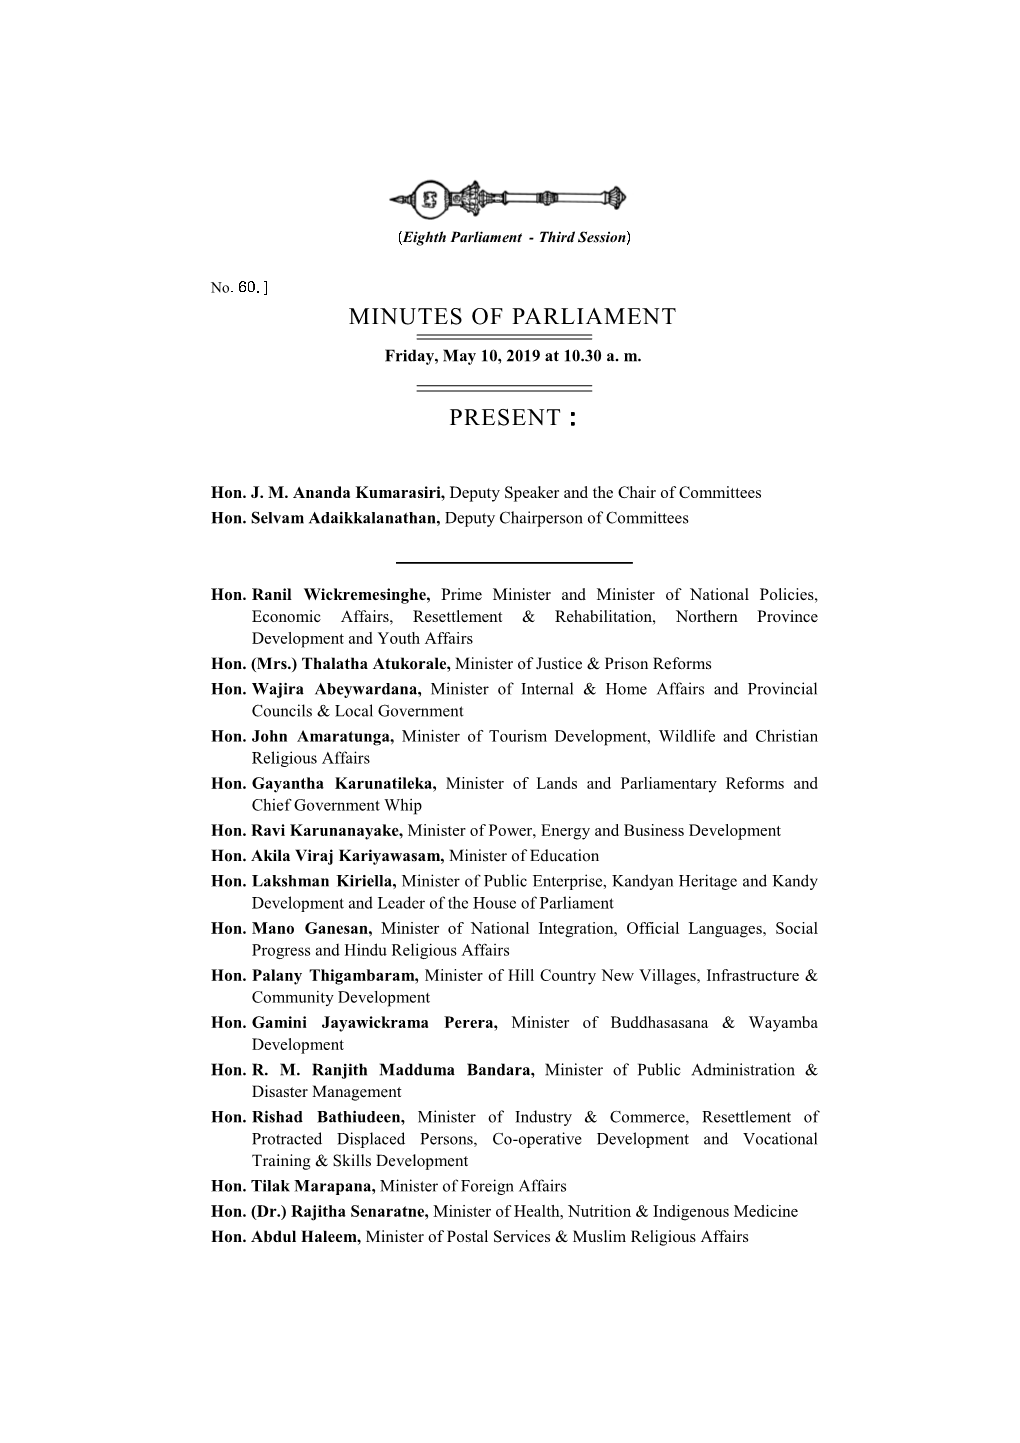 Minutes of Parliament for 10.05.2019